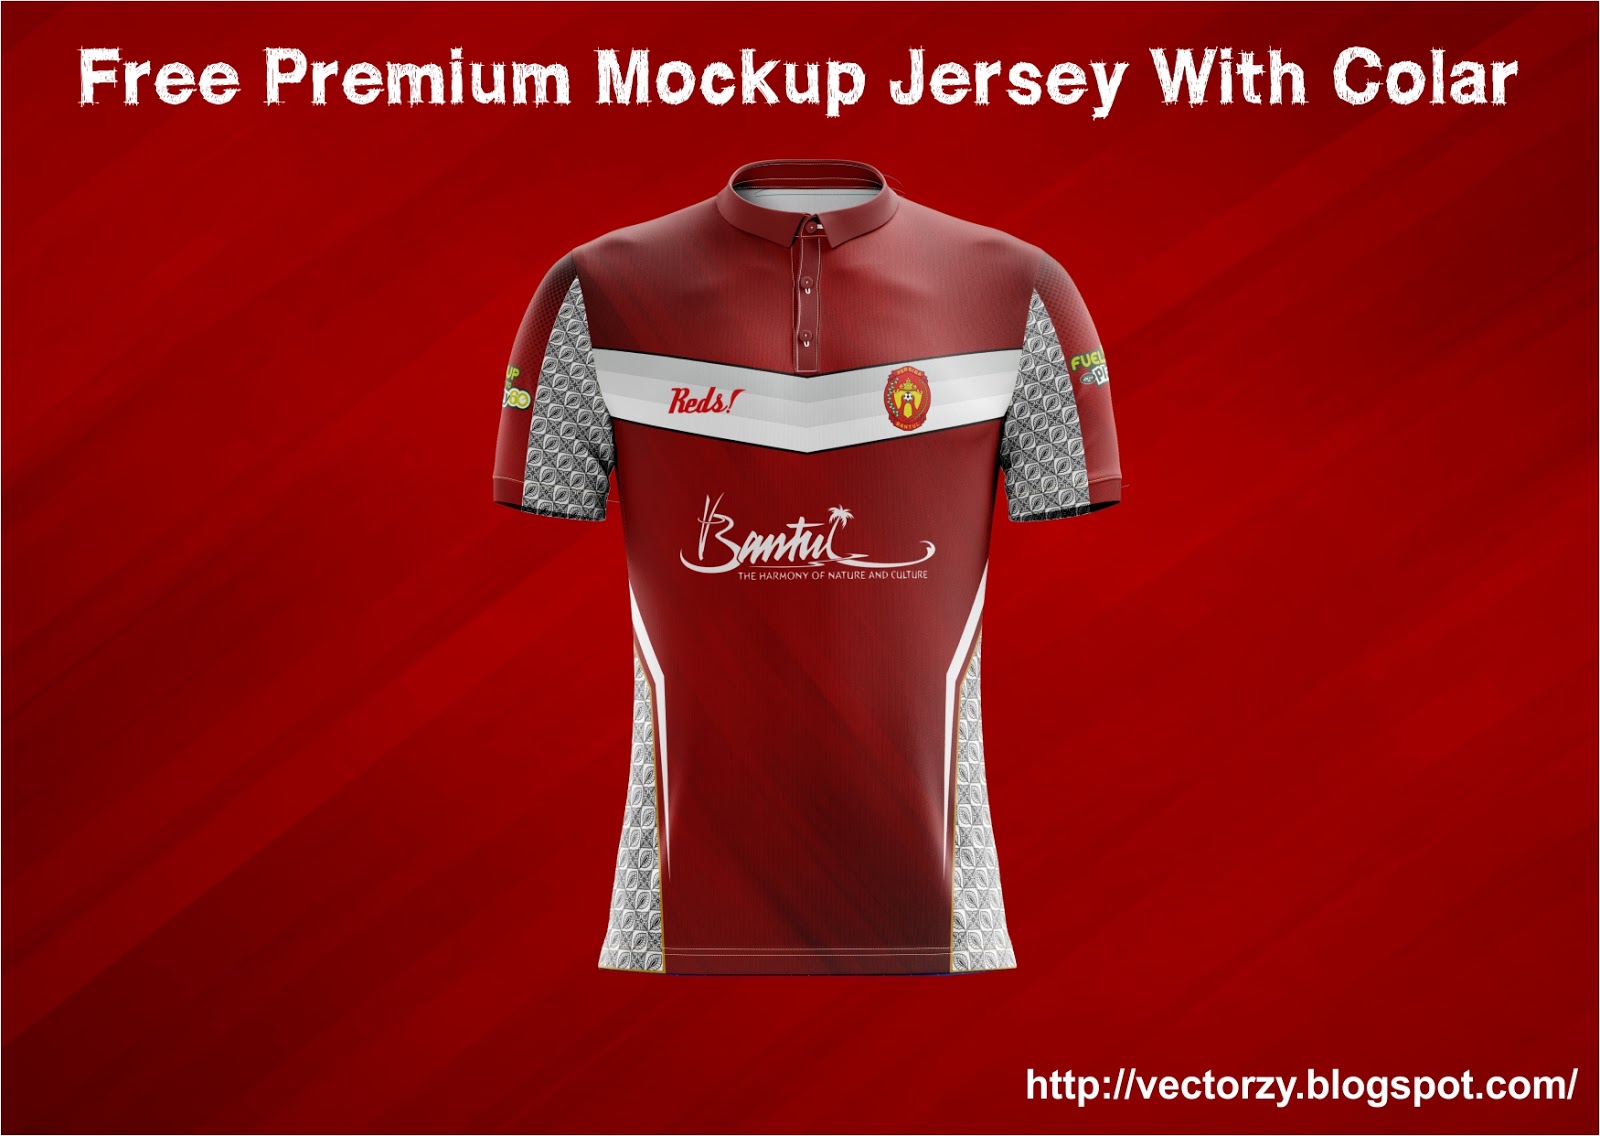 Download Free Download Premium Mockup Jersey With Colar Photoshop ...